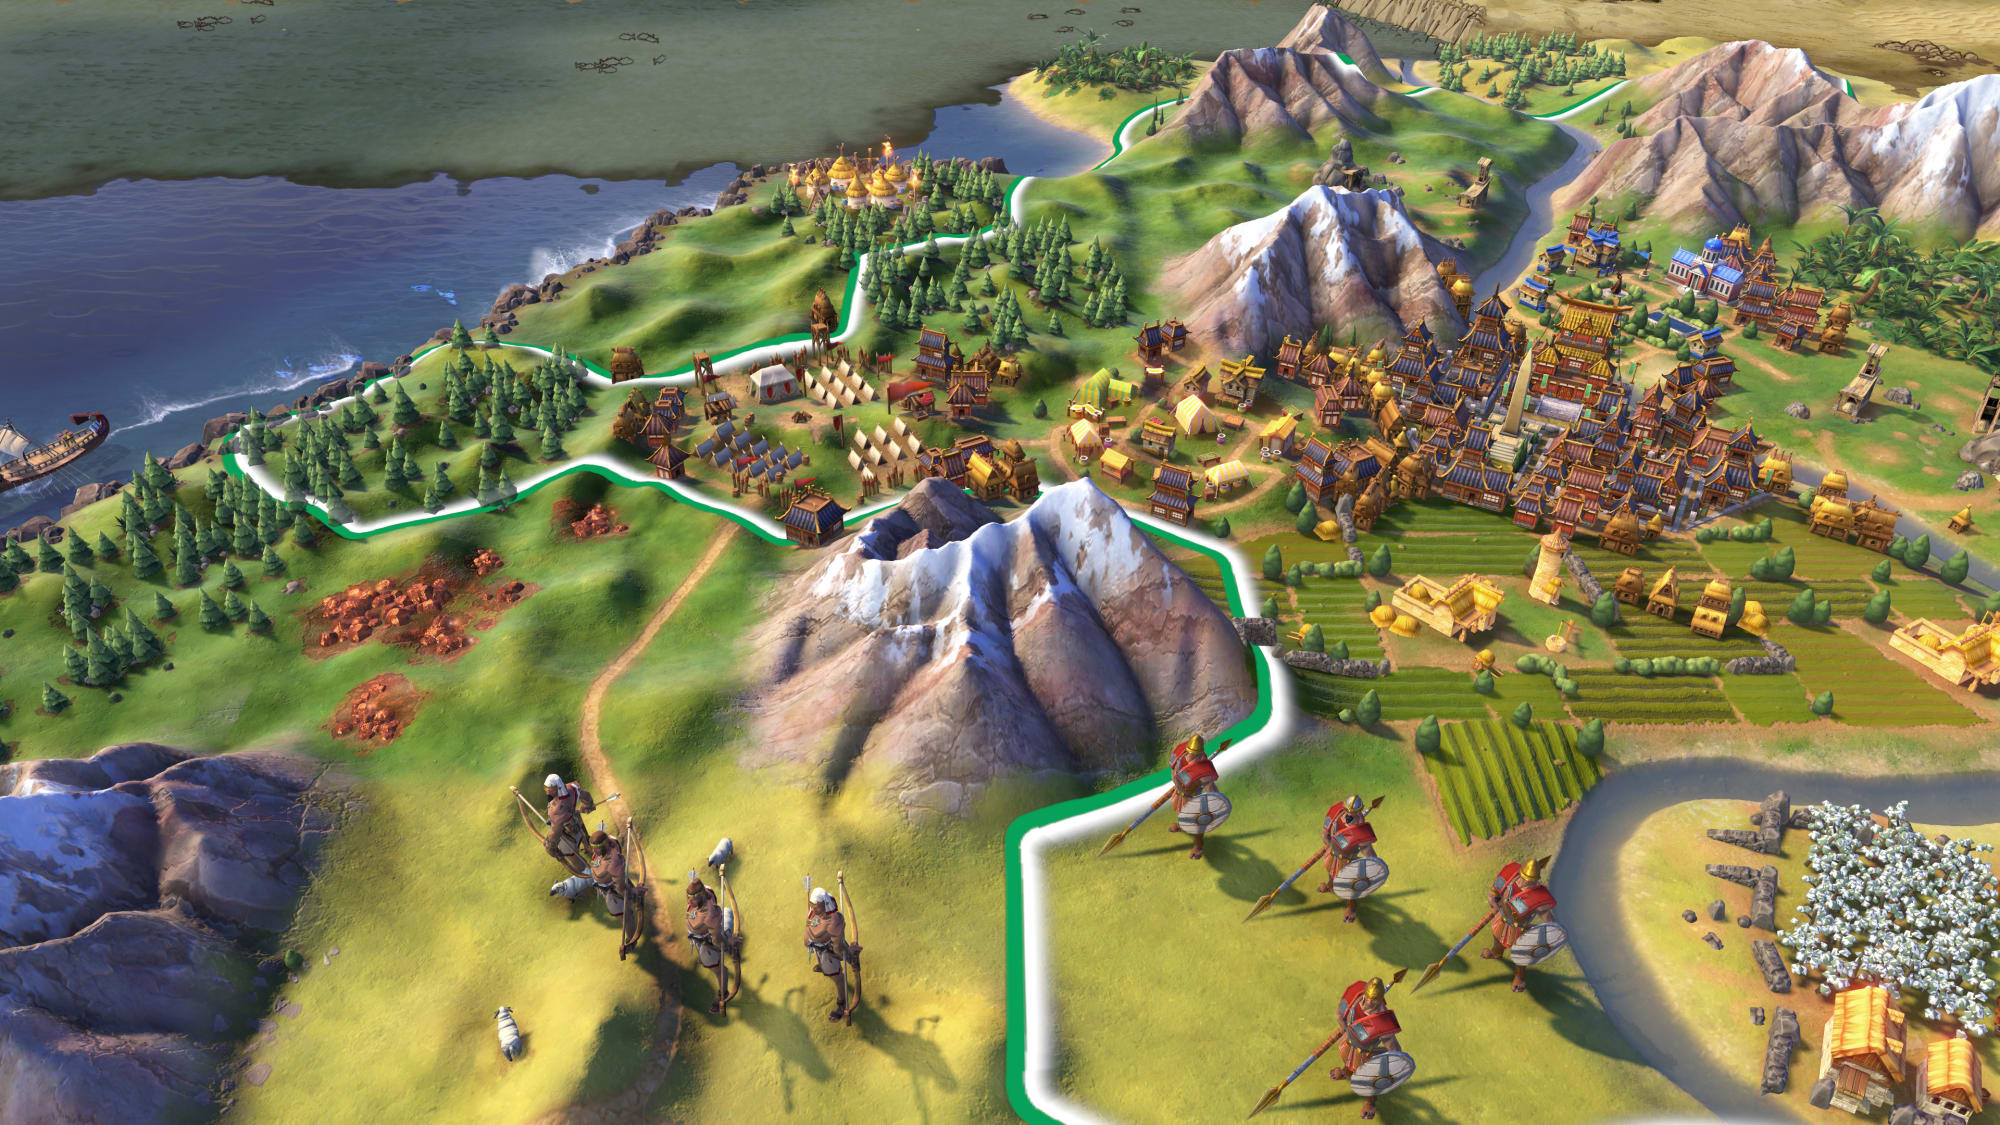 Civilization Vi Is This Week S Free Game Mega Sale Under Way On The Epic Games Store Engadget 日本版